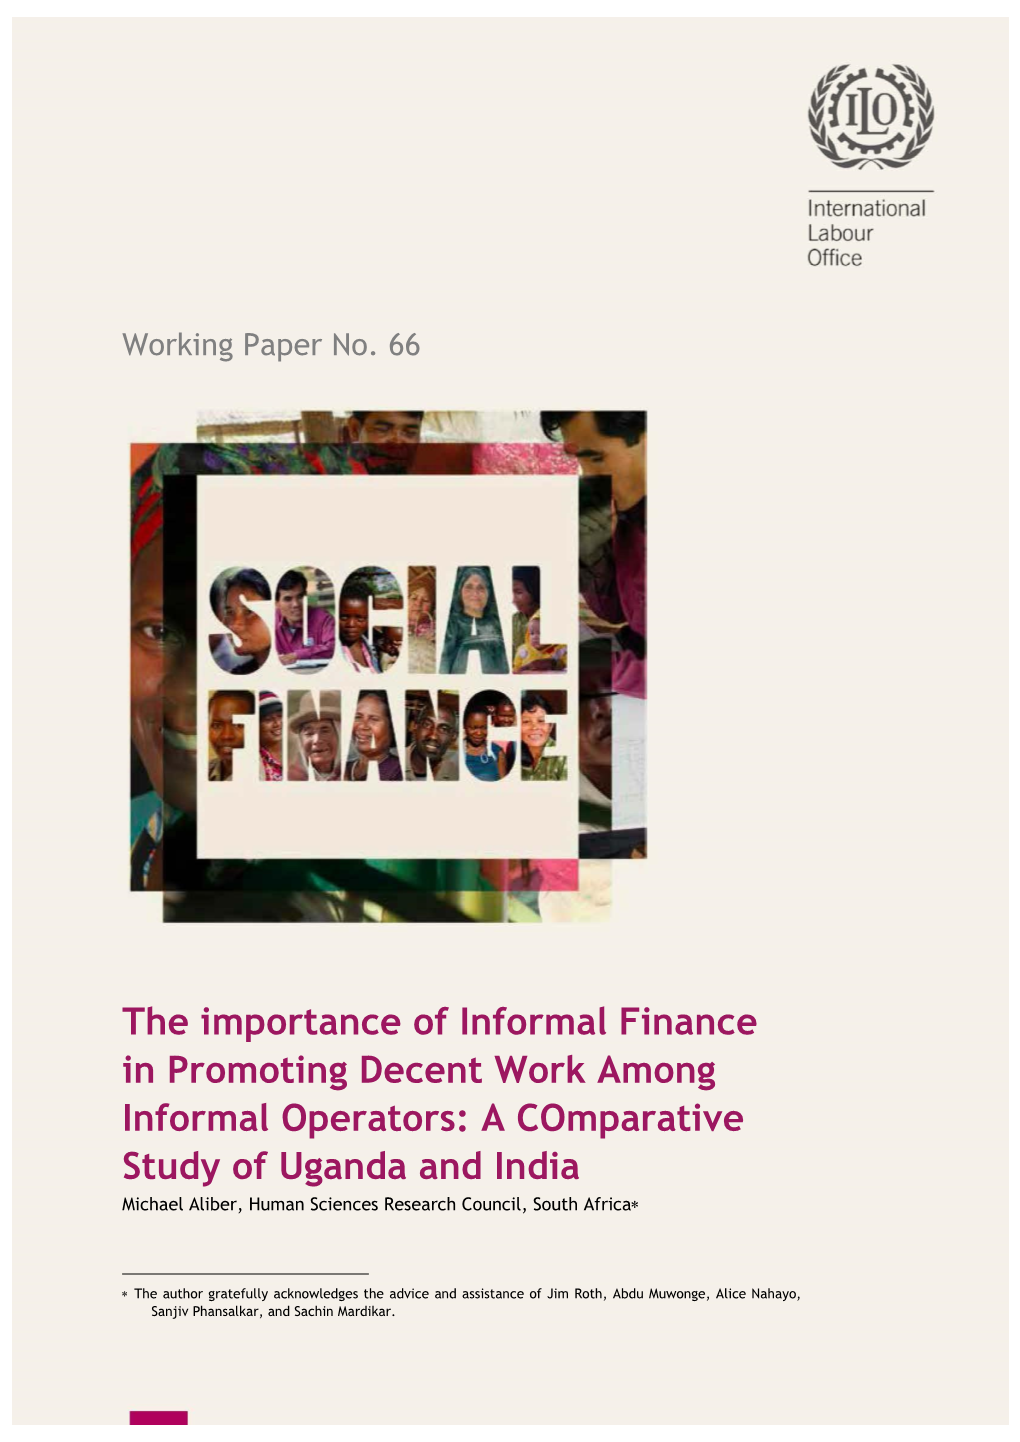 The Importance of Informal Finance in Promoting Decent Work Among